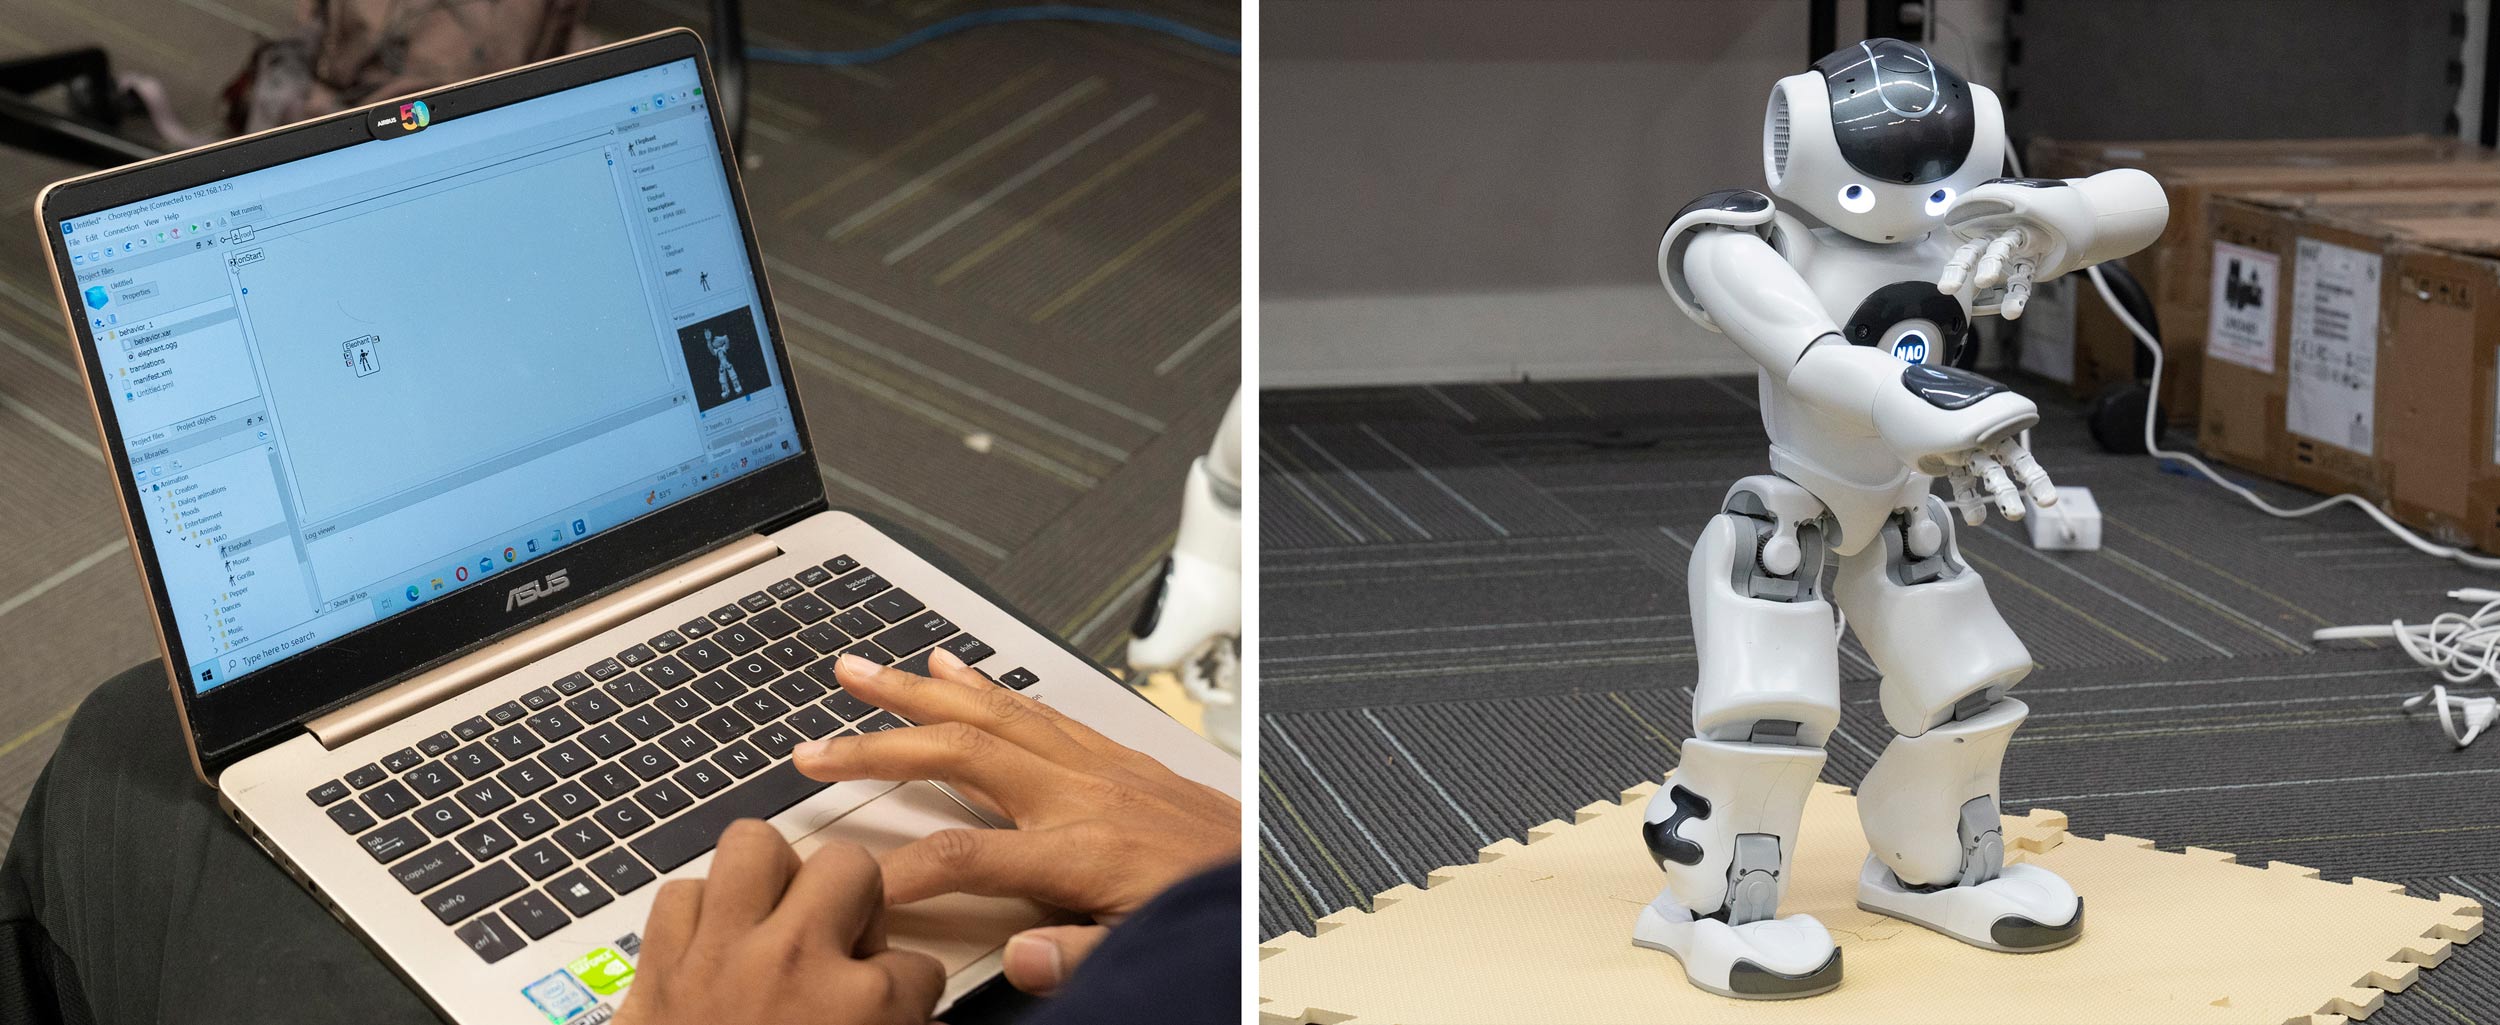 On the left Sujan Sarker typing on a laptop, on the right a small robot